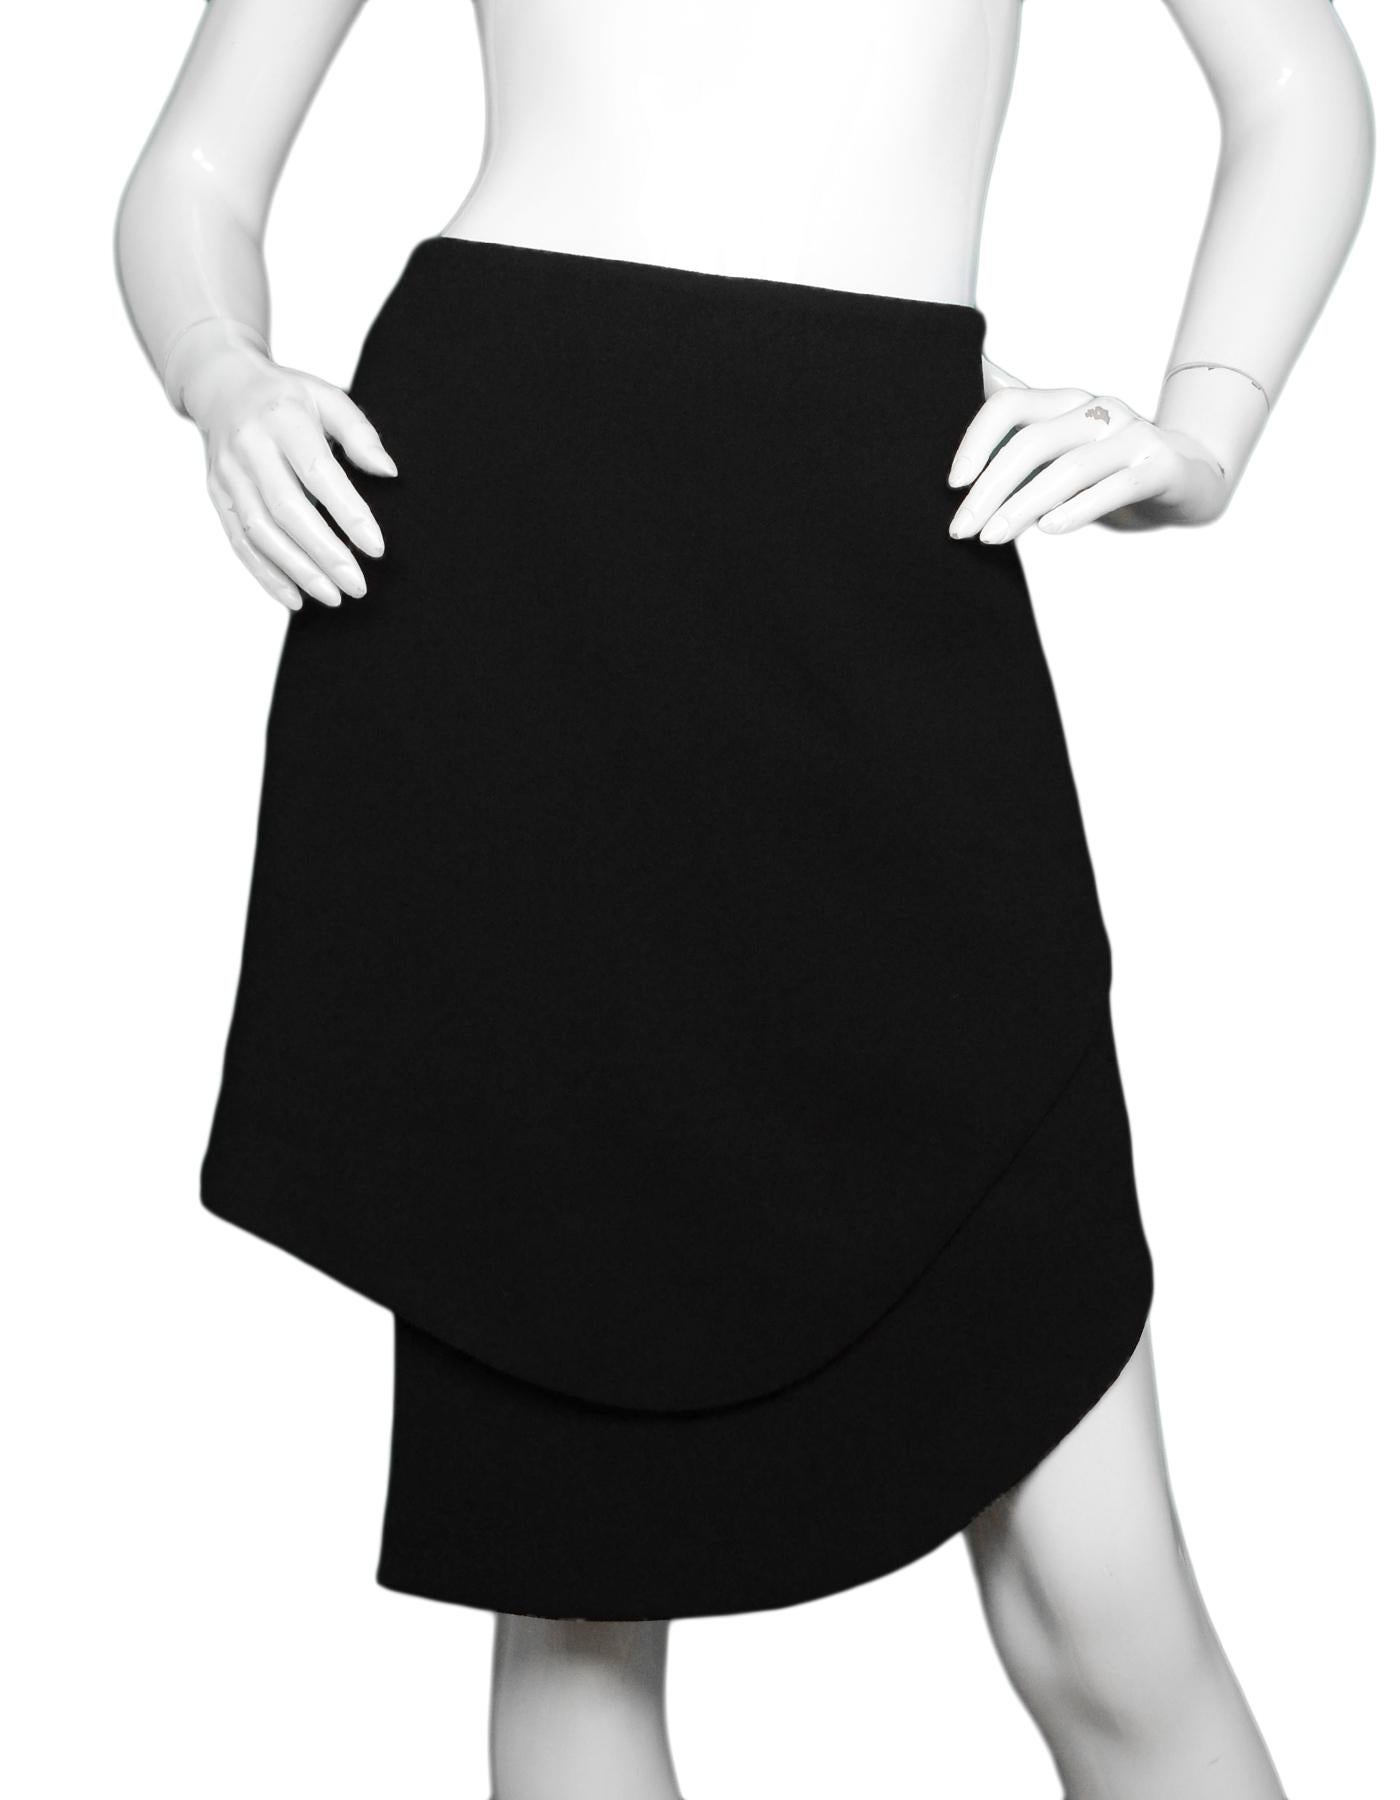 Opening Ceremony Black Asymmetrical Skirt NWT Sz M

Made In: China 
Color: Black
Materials: 100% polyester
Lining:  100% polyester
Closure/Opening: Hidden side zipper with hook eye at top
Overall Condition: Excellent condition with original tags